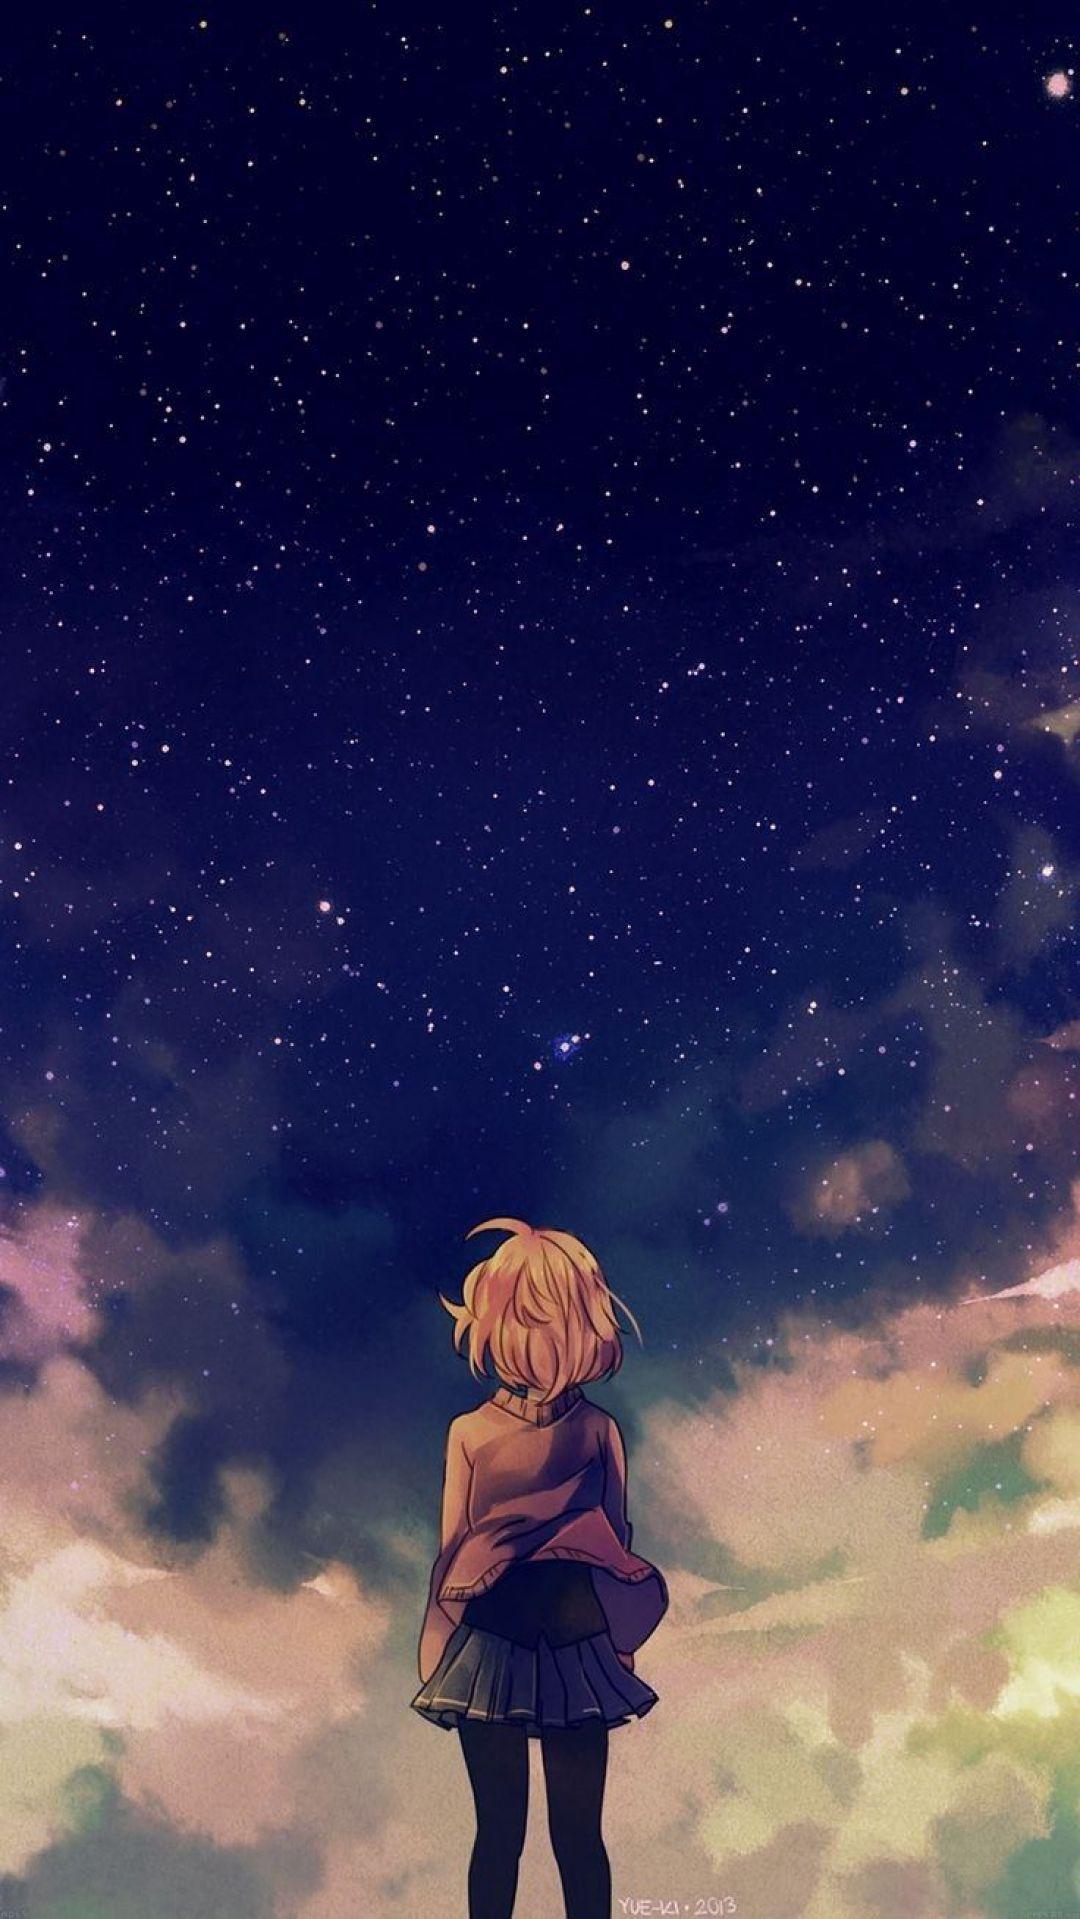 Cute Aesthetic Anime Wallpapers